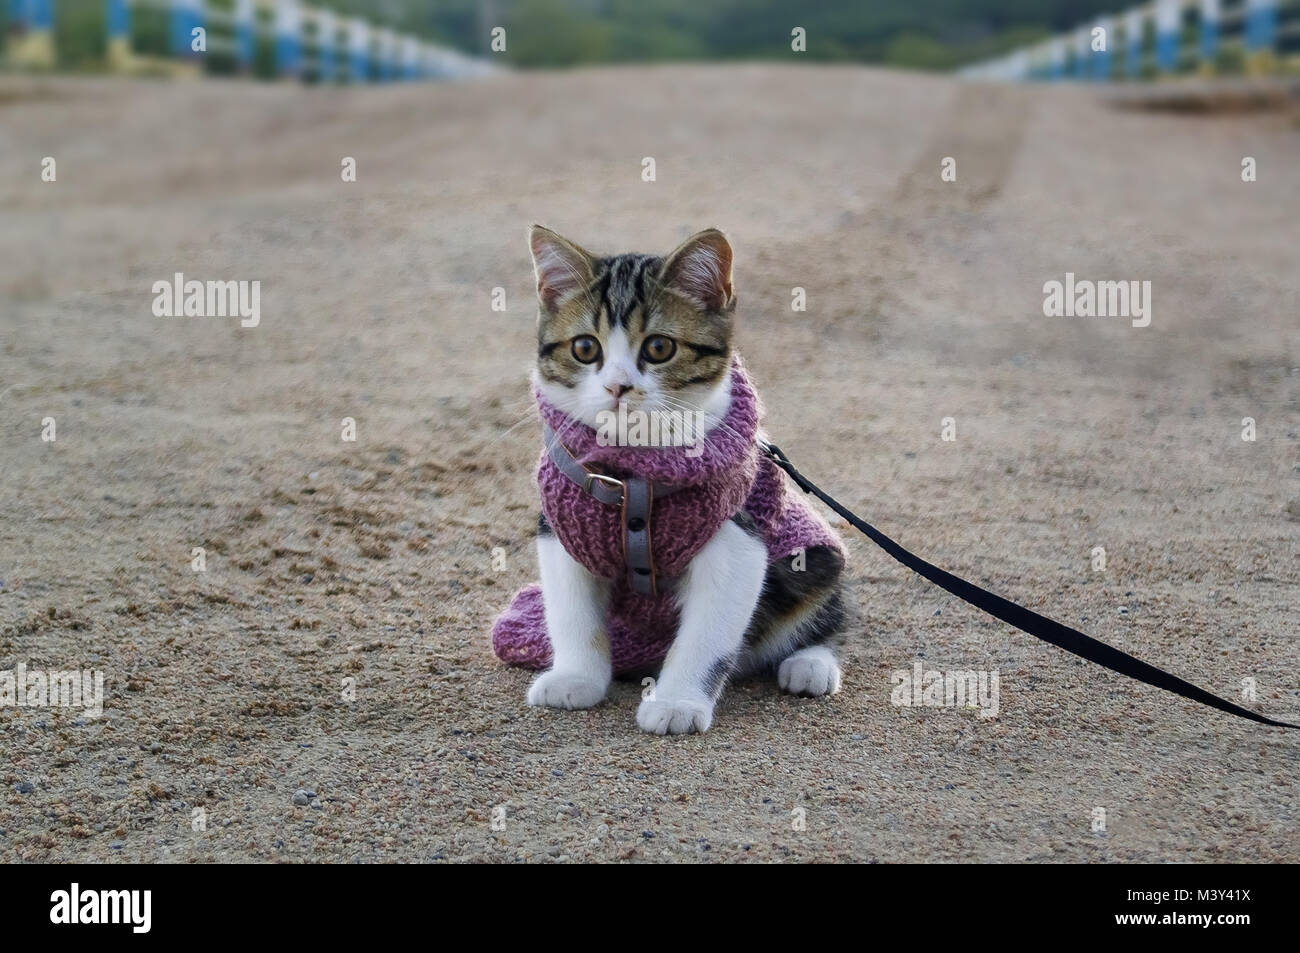 Sad kitten. Kitten alone on the road waiting for the owner Stock Photo